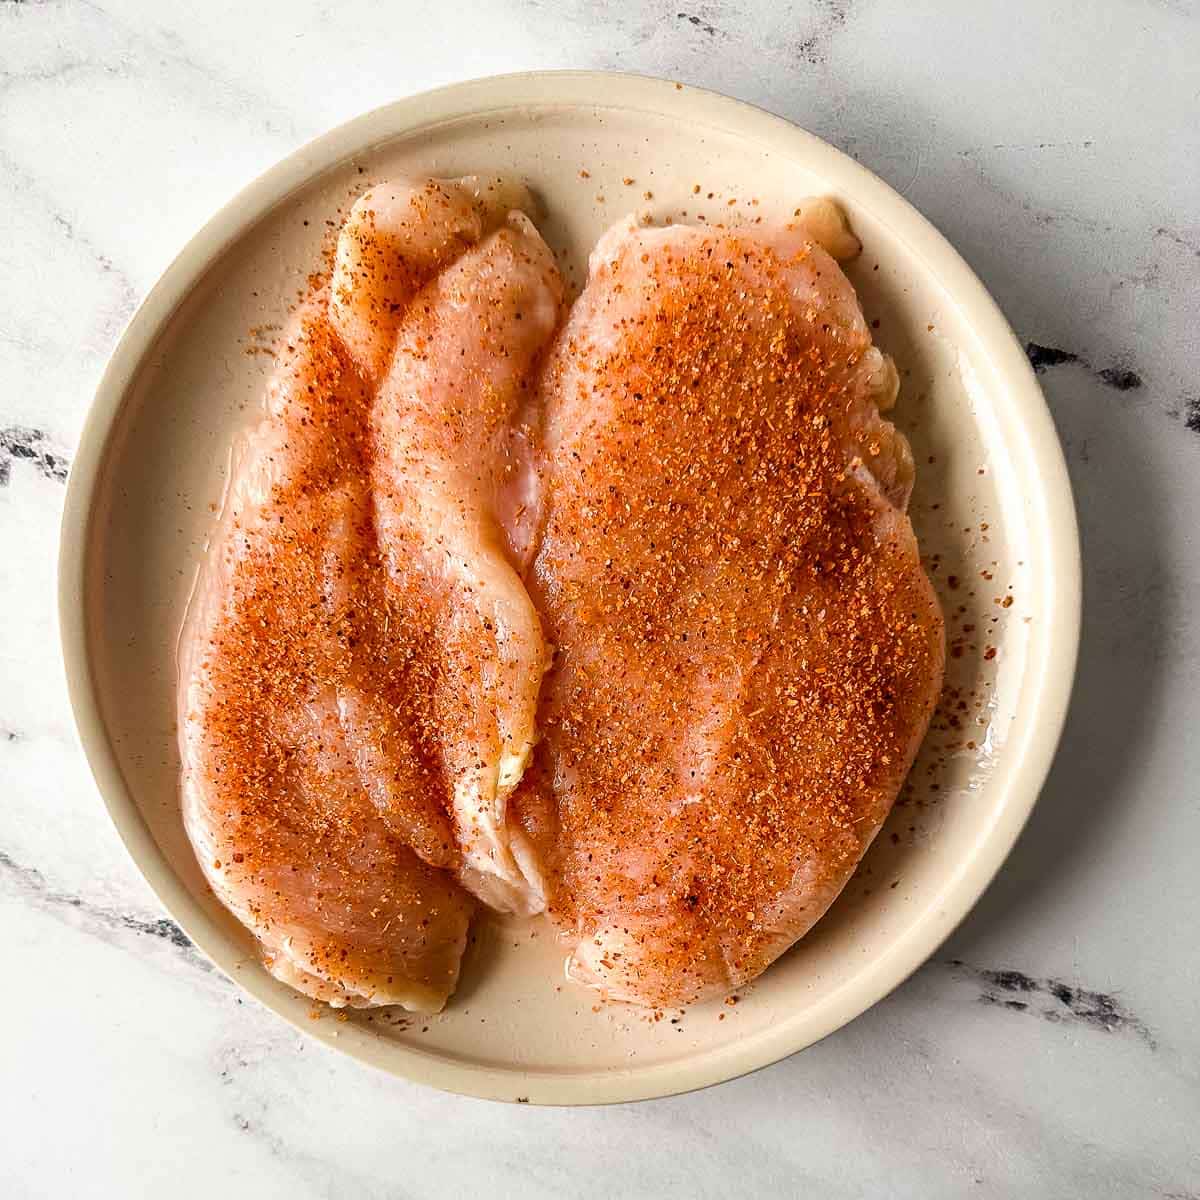 Two chicken breasts on a white plate coated liberally with Tajín seasoning.